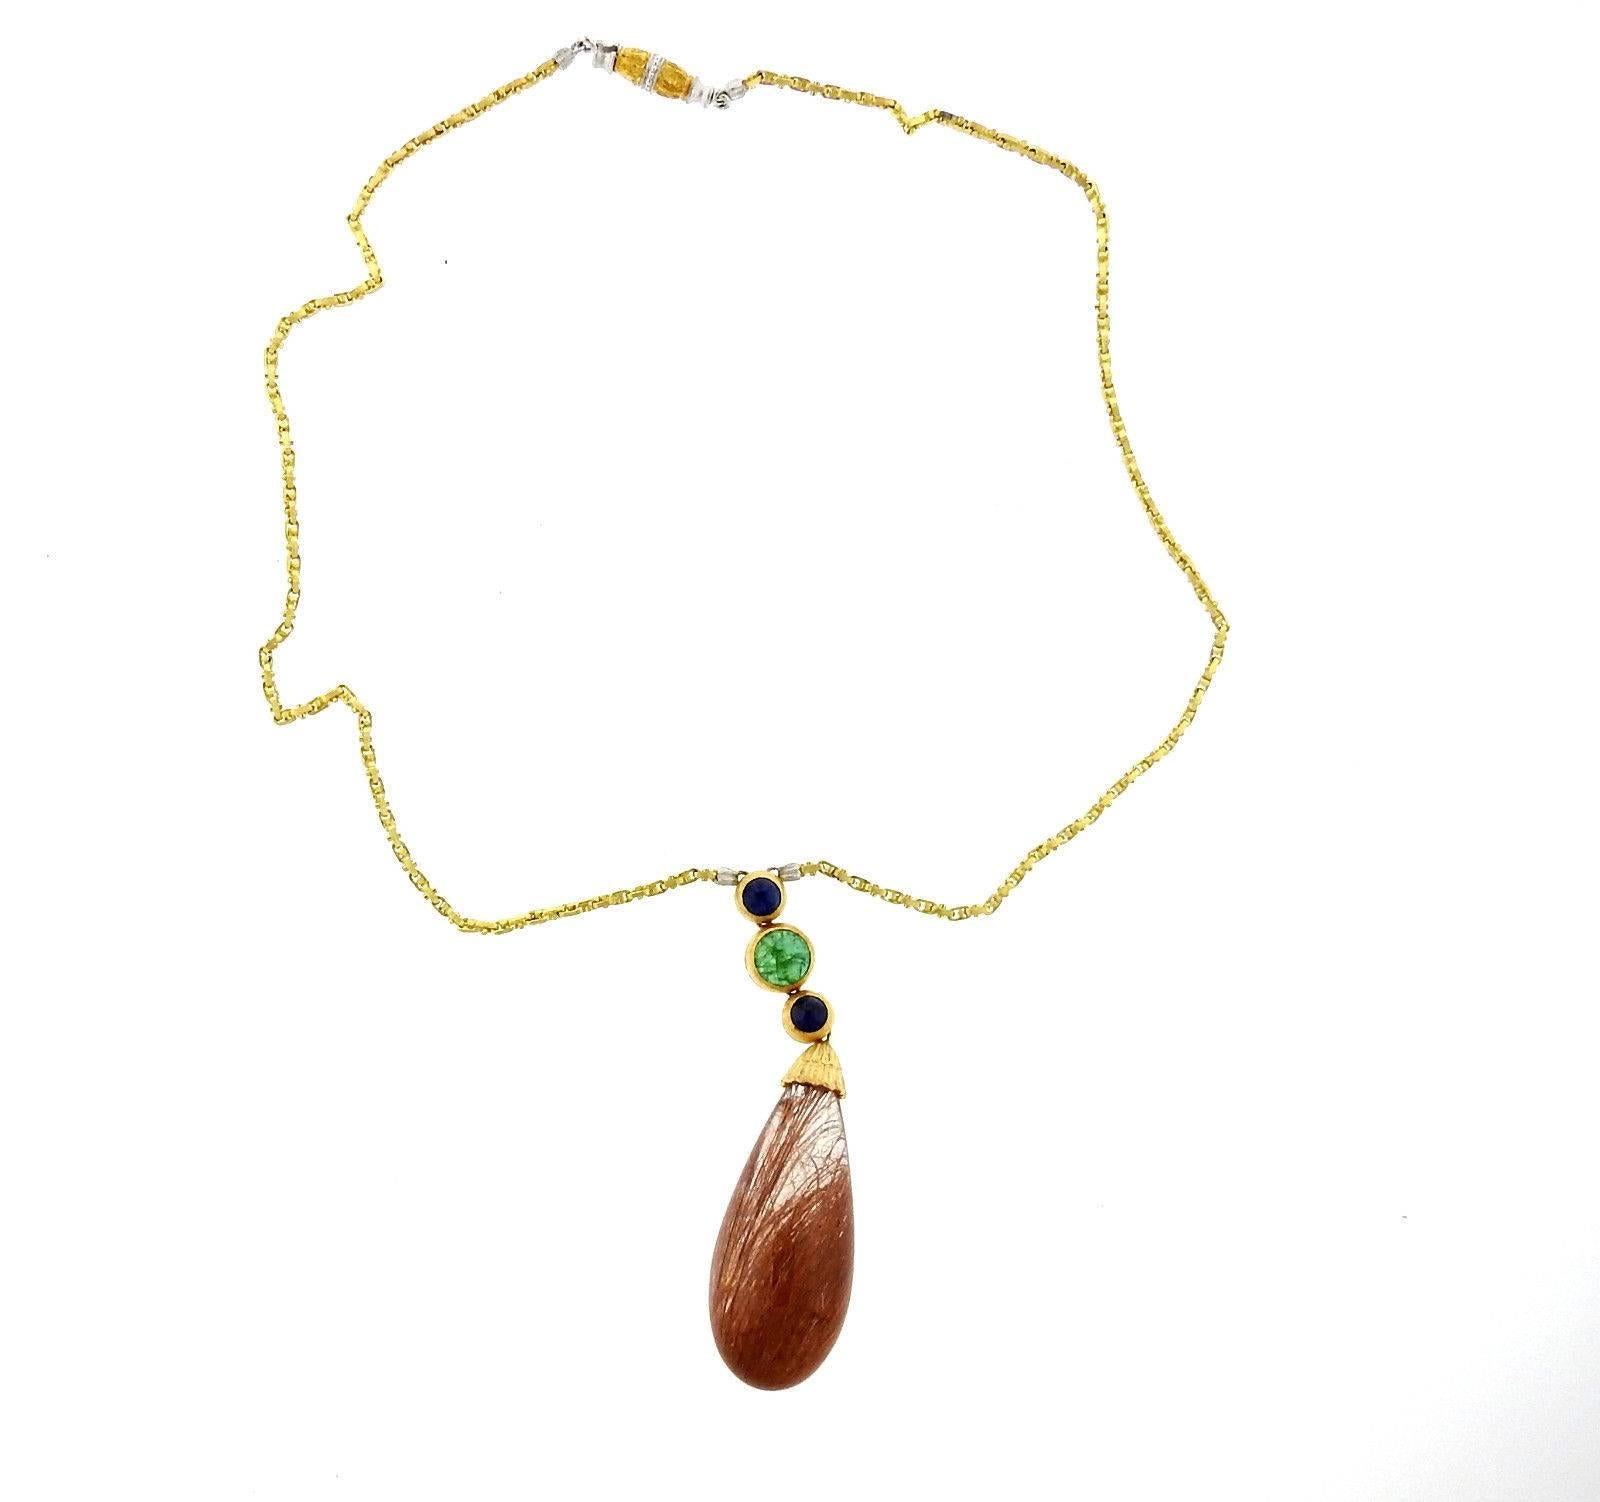 An 18k yellow and white gold necklace with a pendant featuring emerald, and sapphire cabochons accenting a large teardrop rutilated quartz (36mm x 17mm).  The necklace is 16 2/8